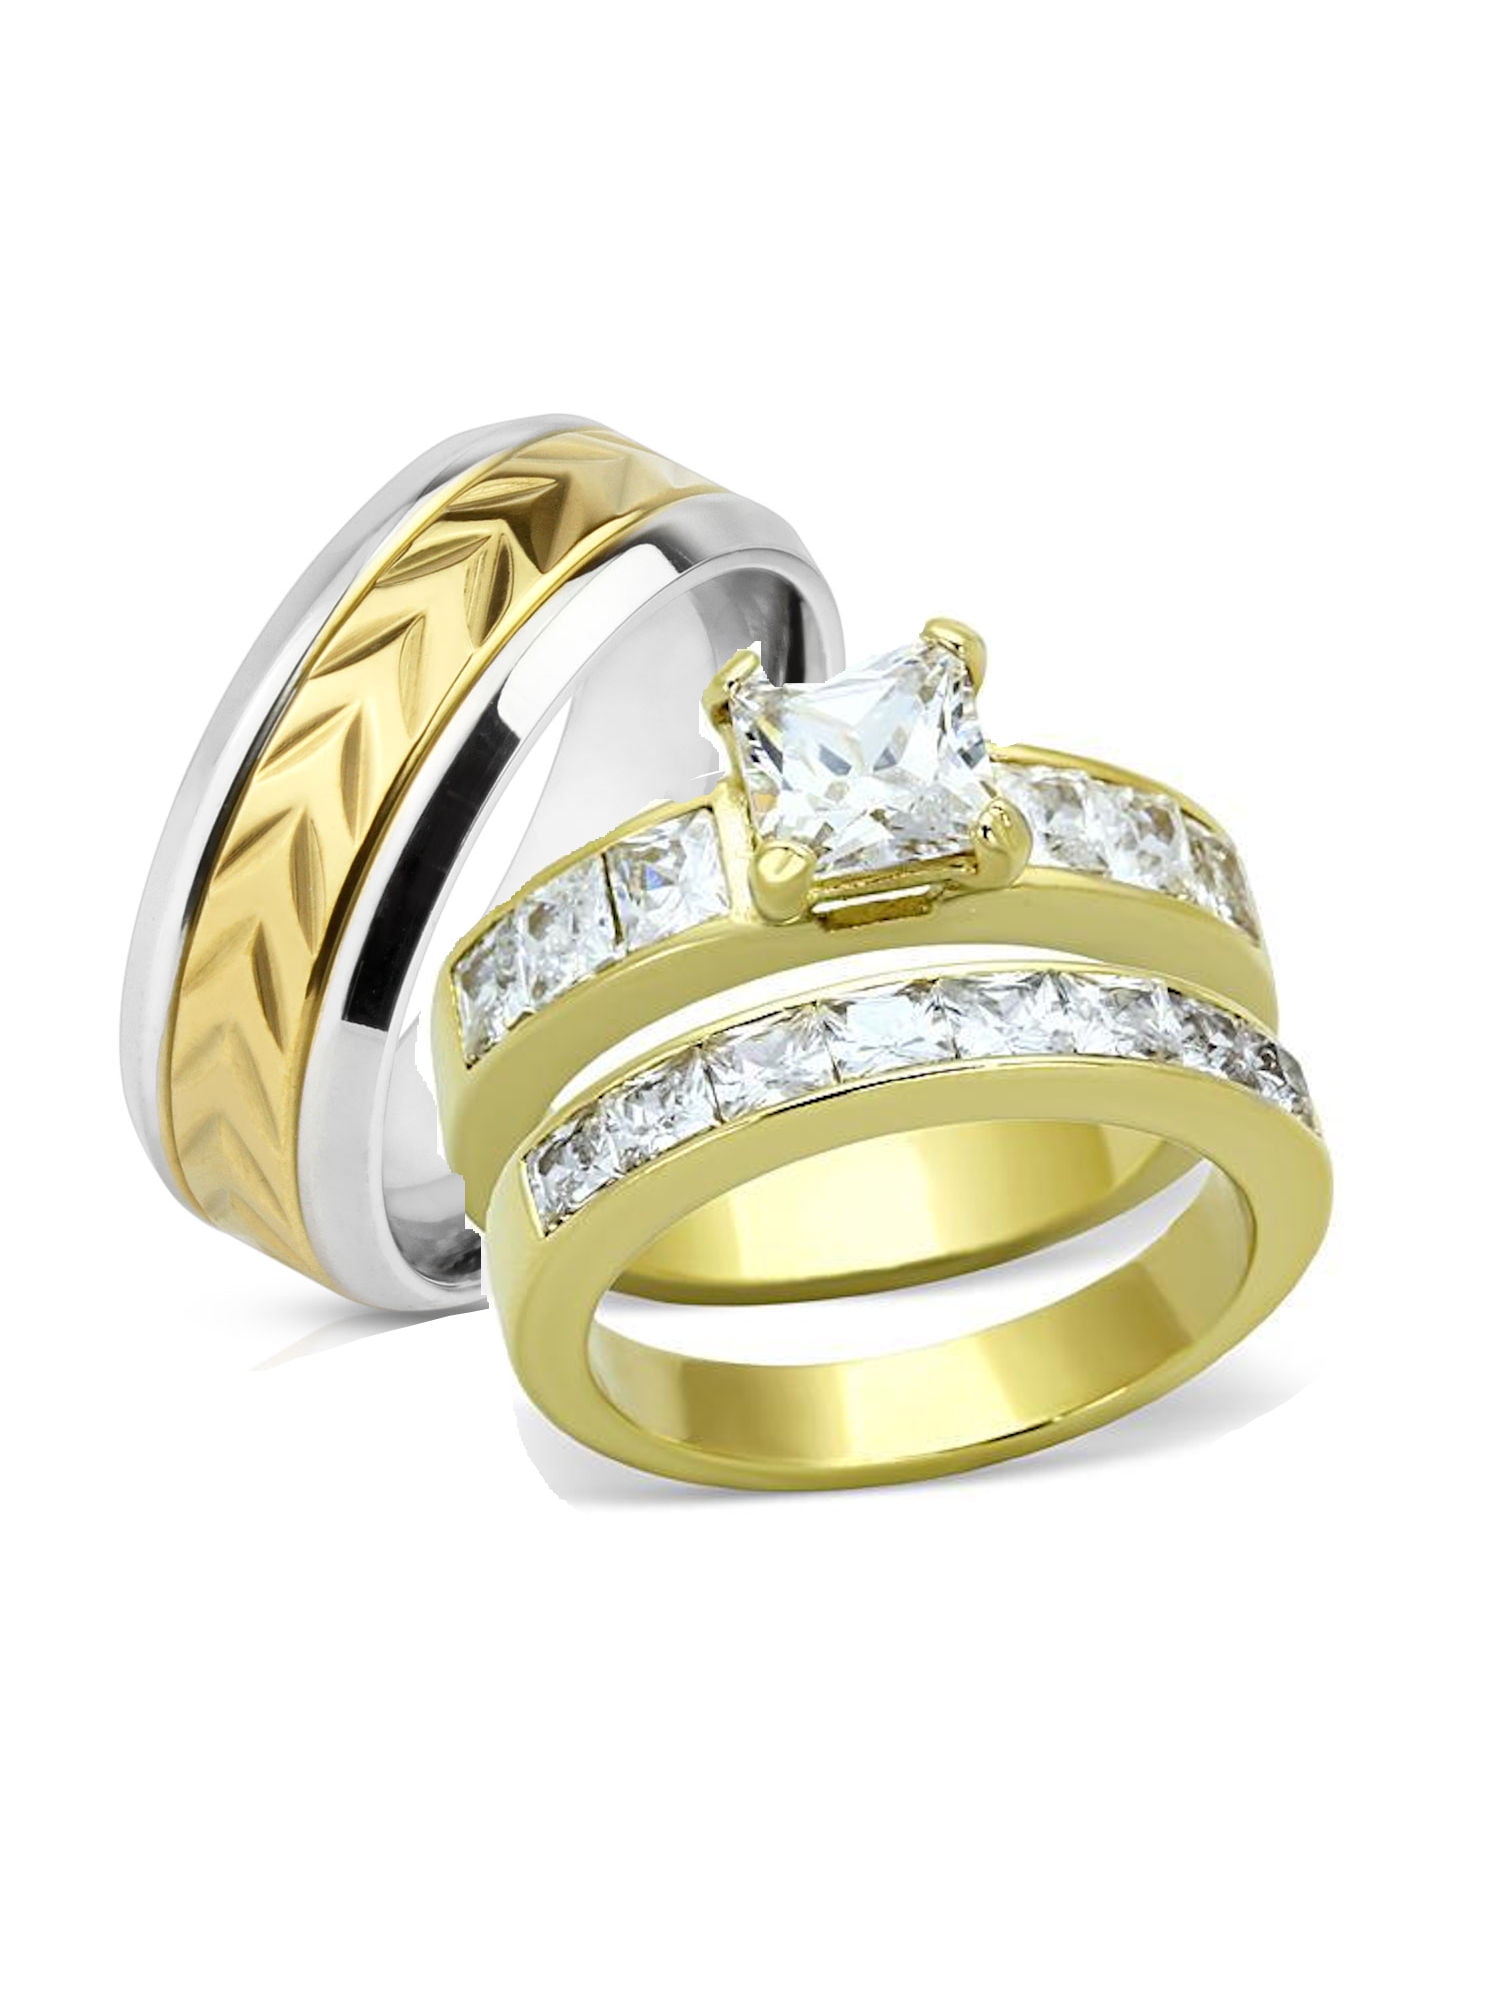 Women's Stainless Steel Solitaire Round cz Engagement Wedding Gold GP Ring Set 